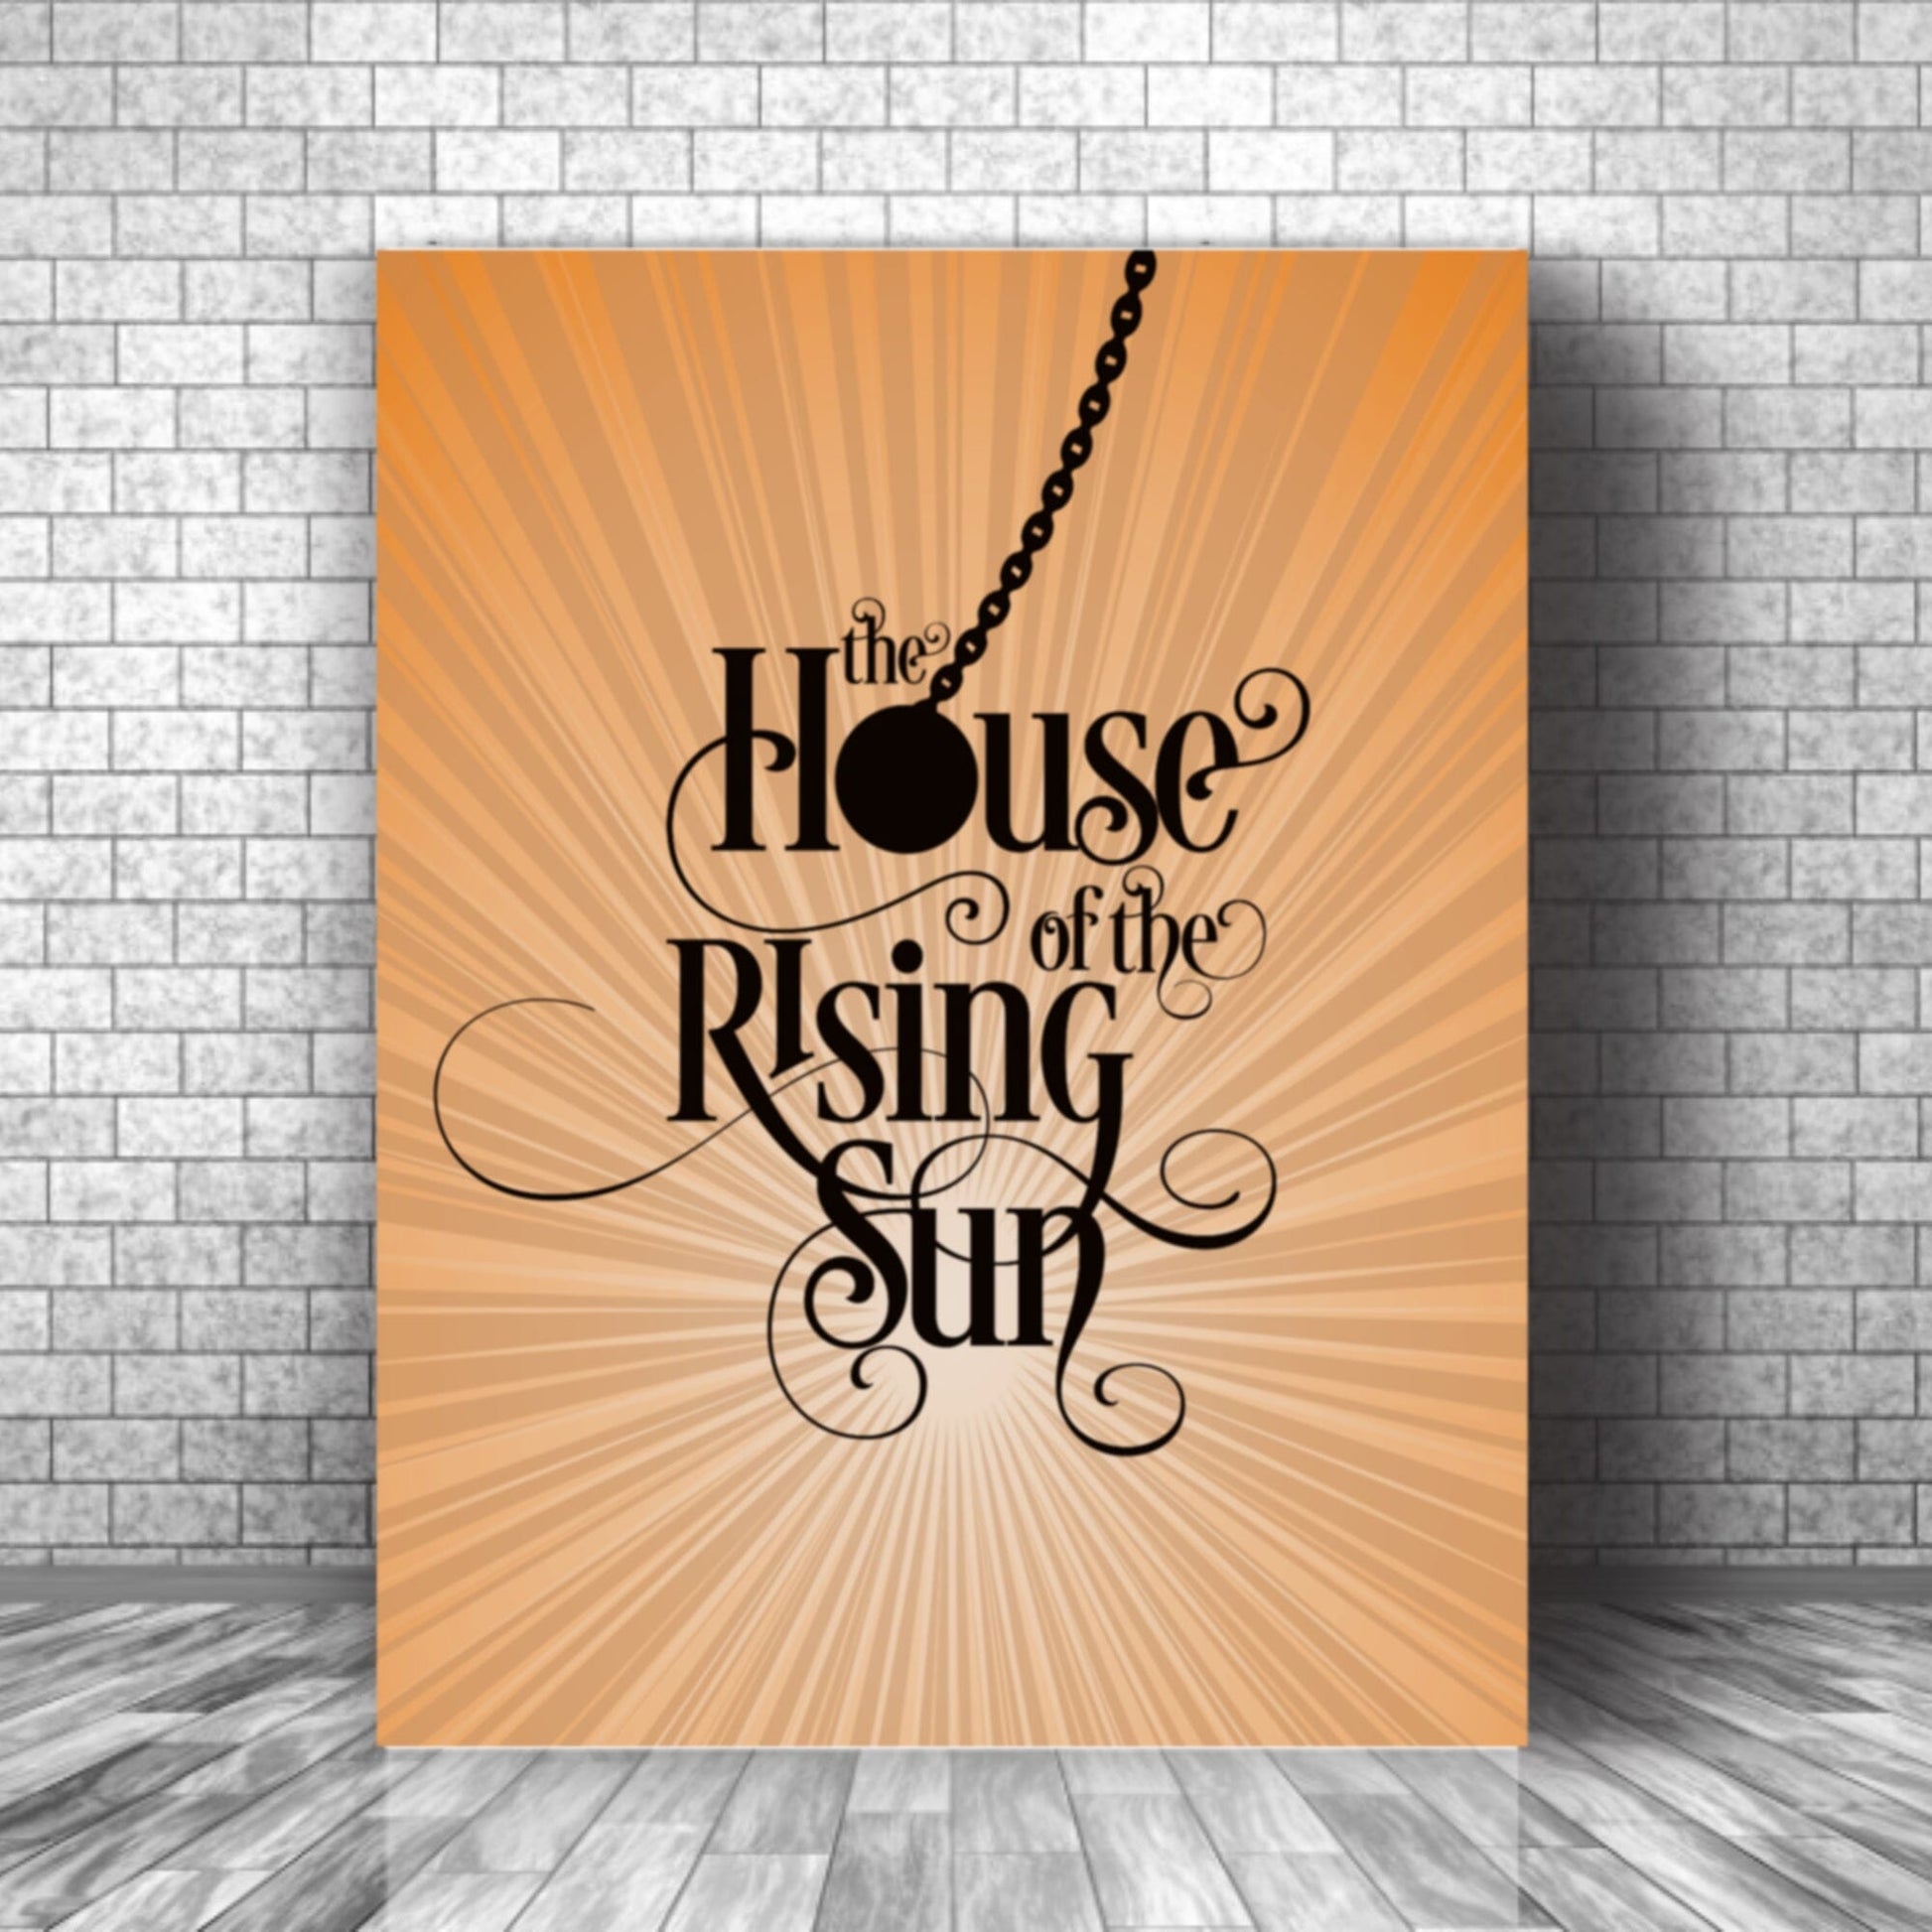 House of the Rising Sun by The Animals - 60s Song Lyric Art Song Lyrics Art Song Lyrics Art 11x14 Canvas Wrap 